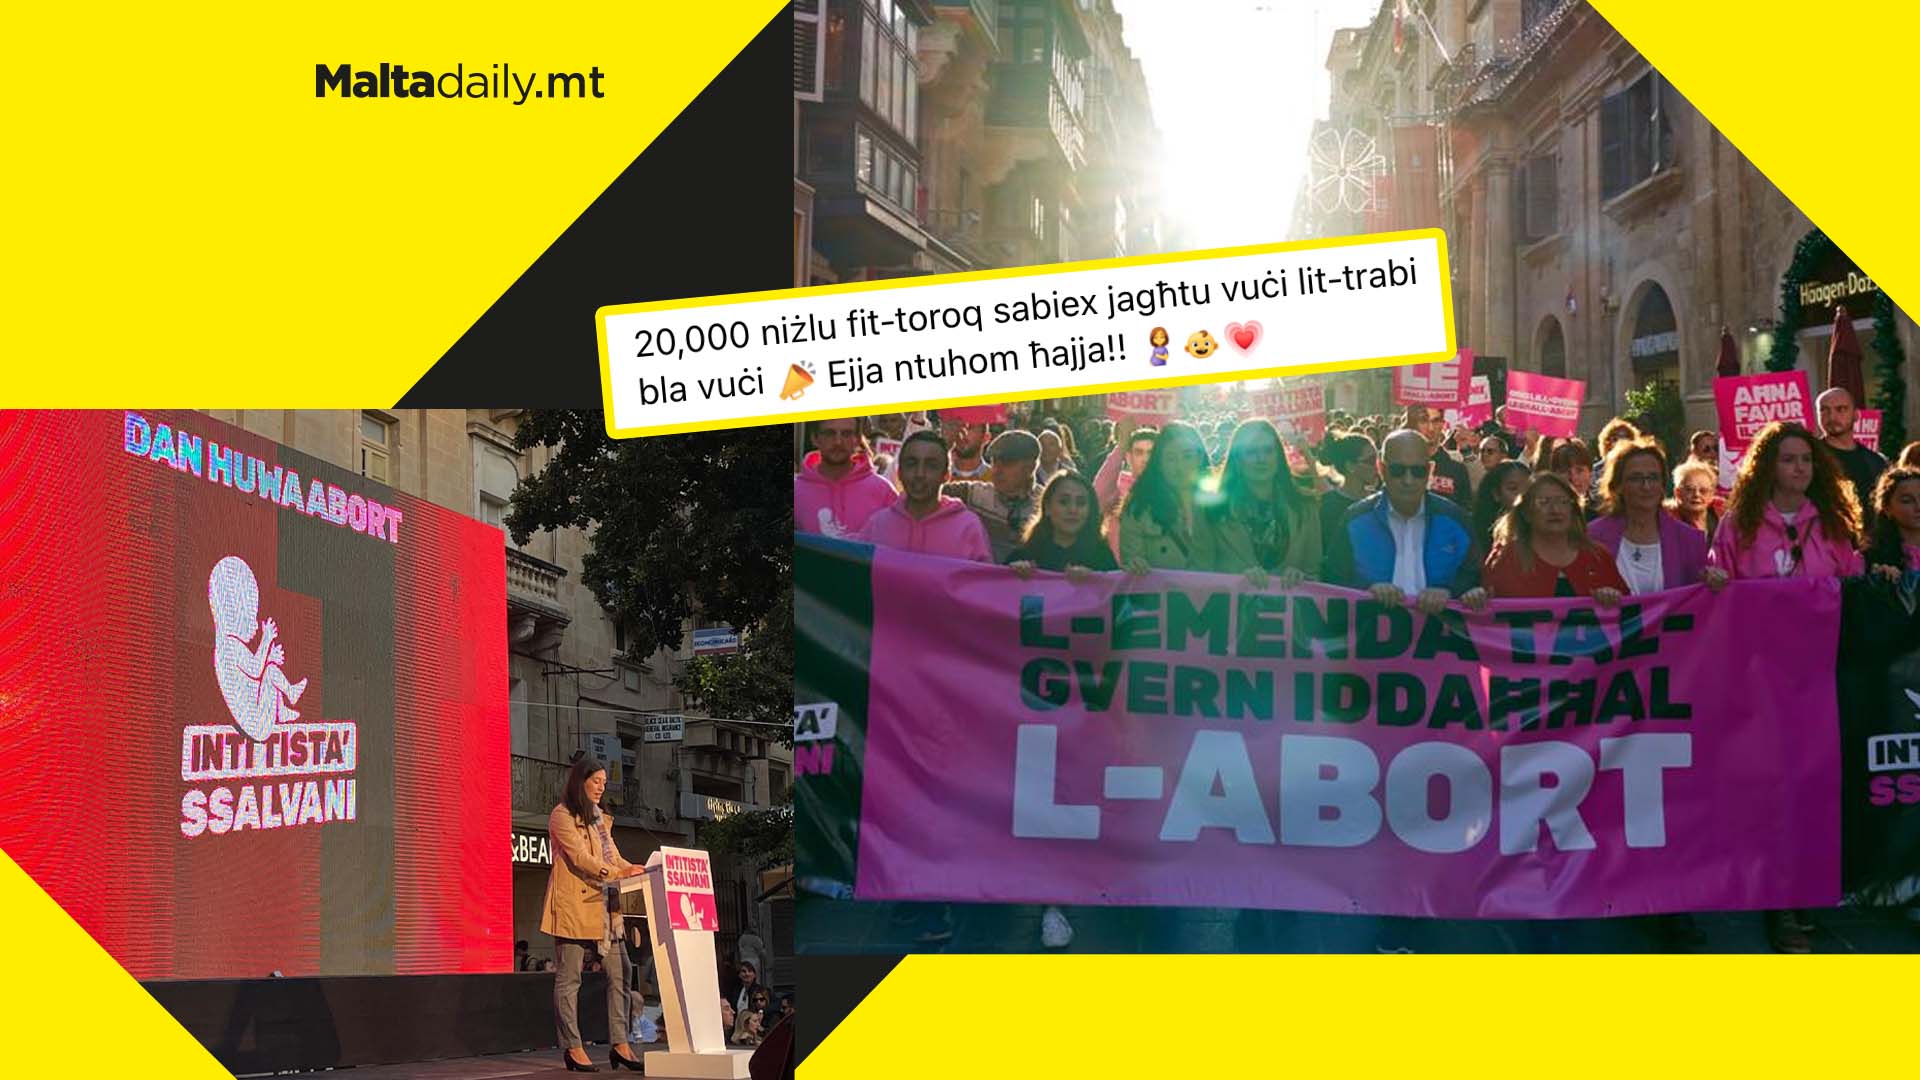 20,000 people attended pro-life march in Valletta, Life Network Foundation claims